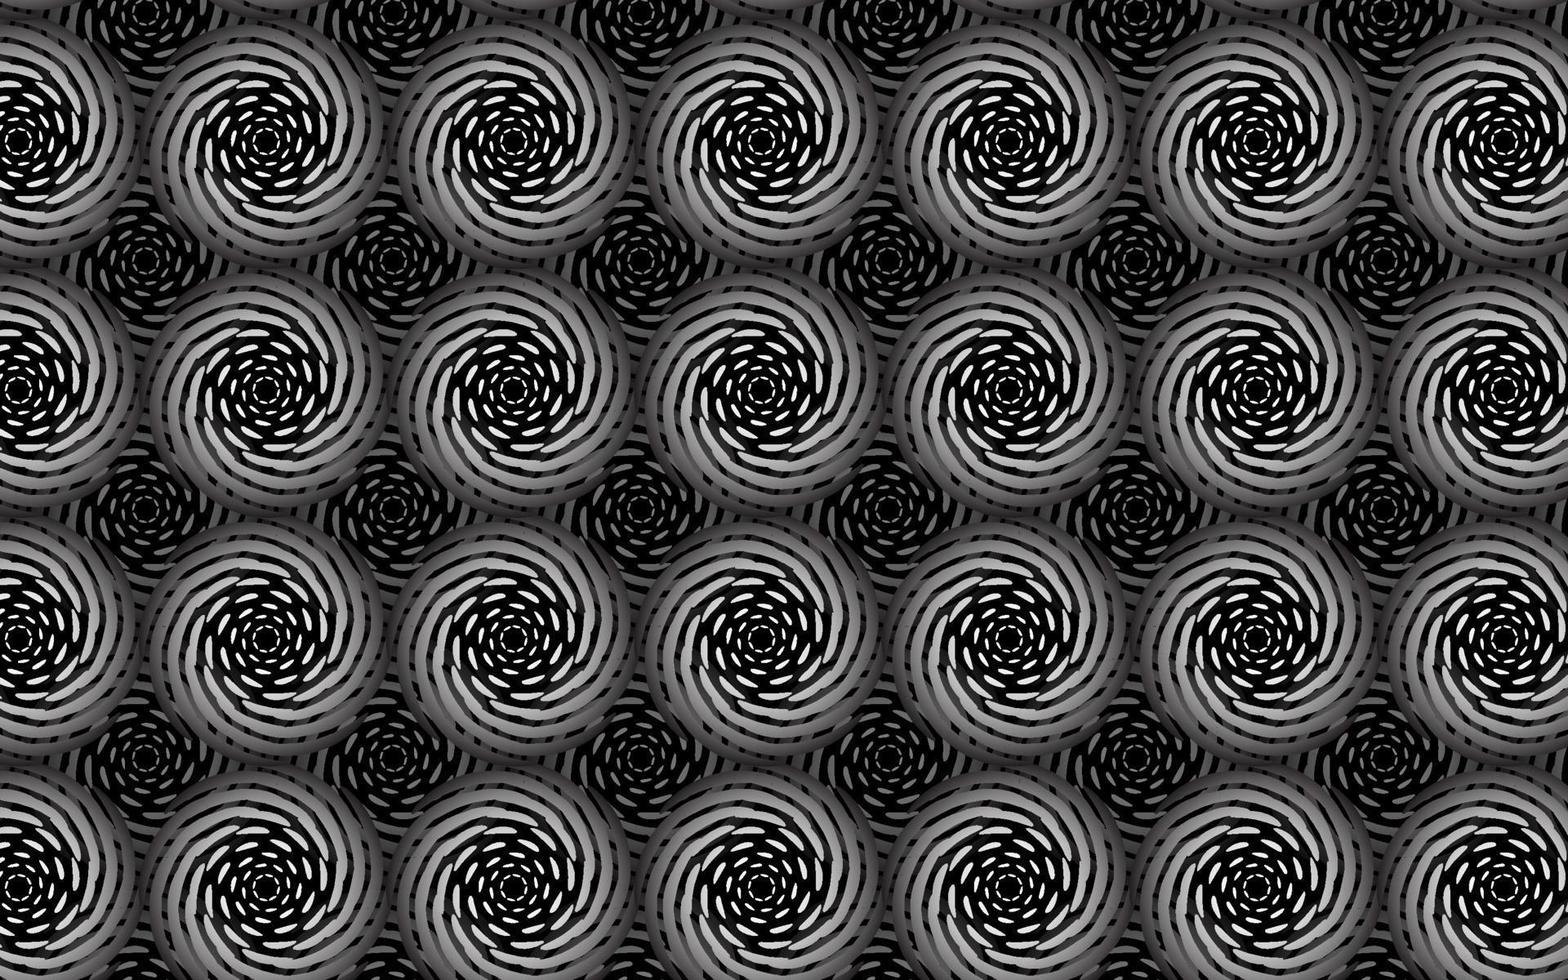 Black and white abstract design pattern, seamless monochrome background roses. vector